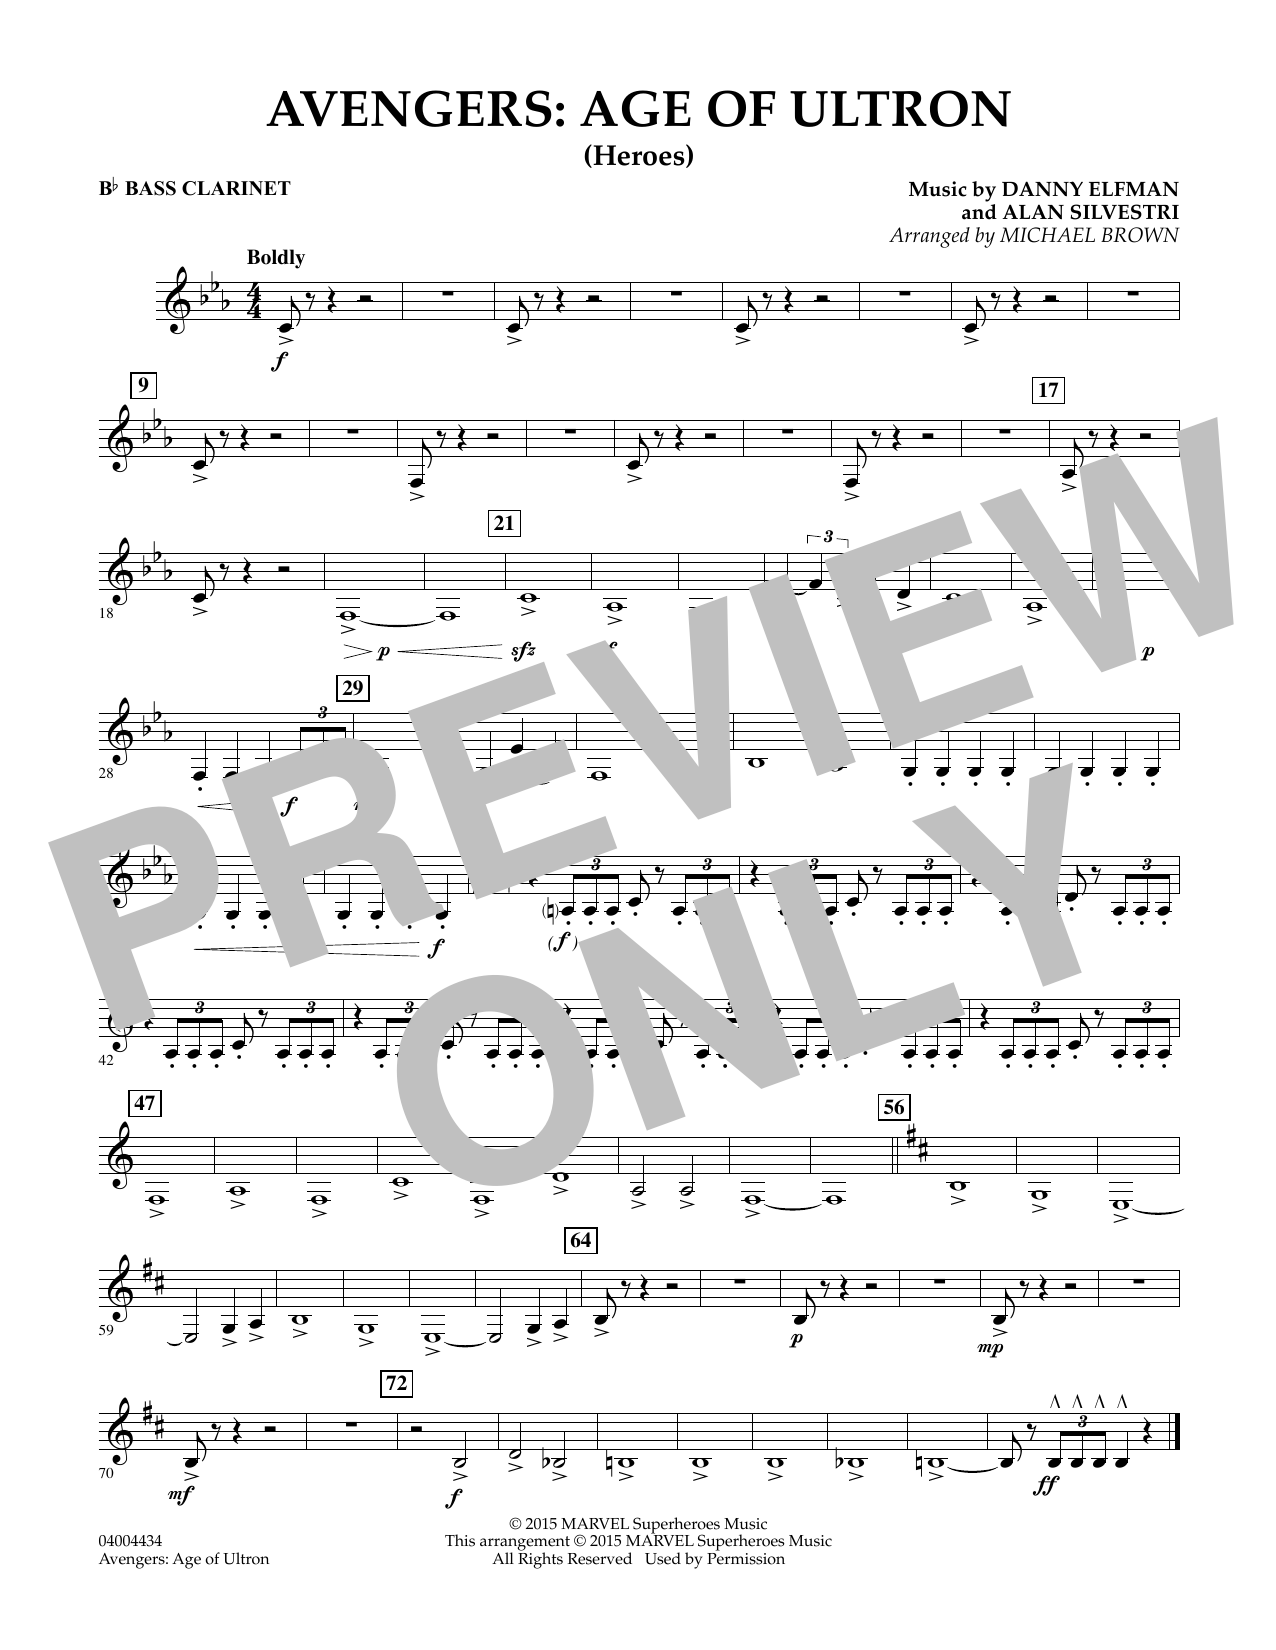 Michael Brown Avengers: The Age of Ultron (Main Theme) - Bb Bass Clarinet sheet music notes and chords. Download Printable PDF.